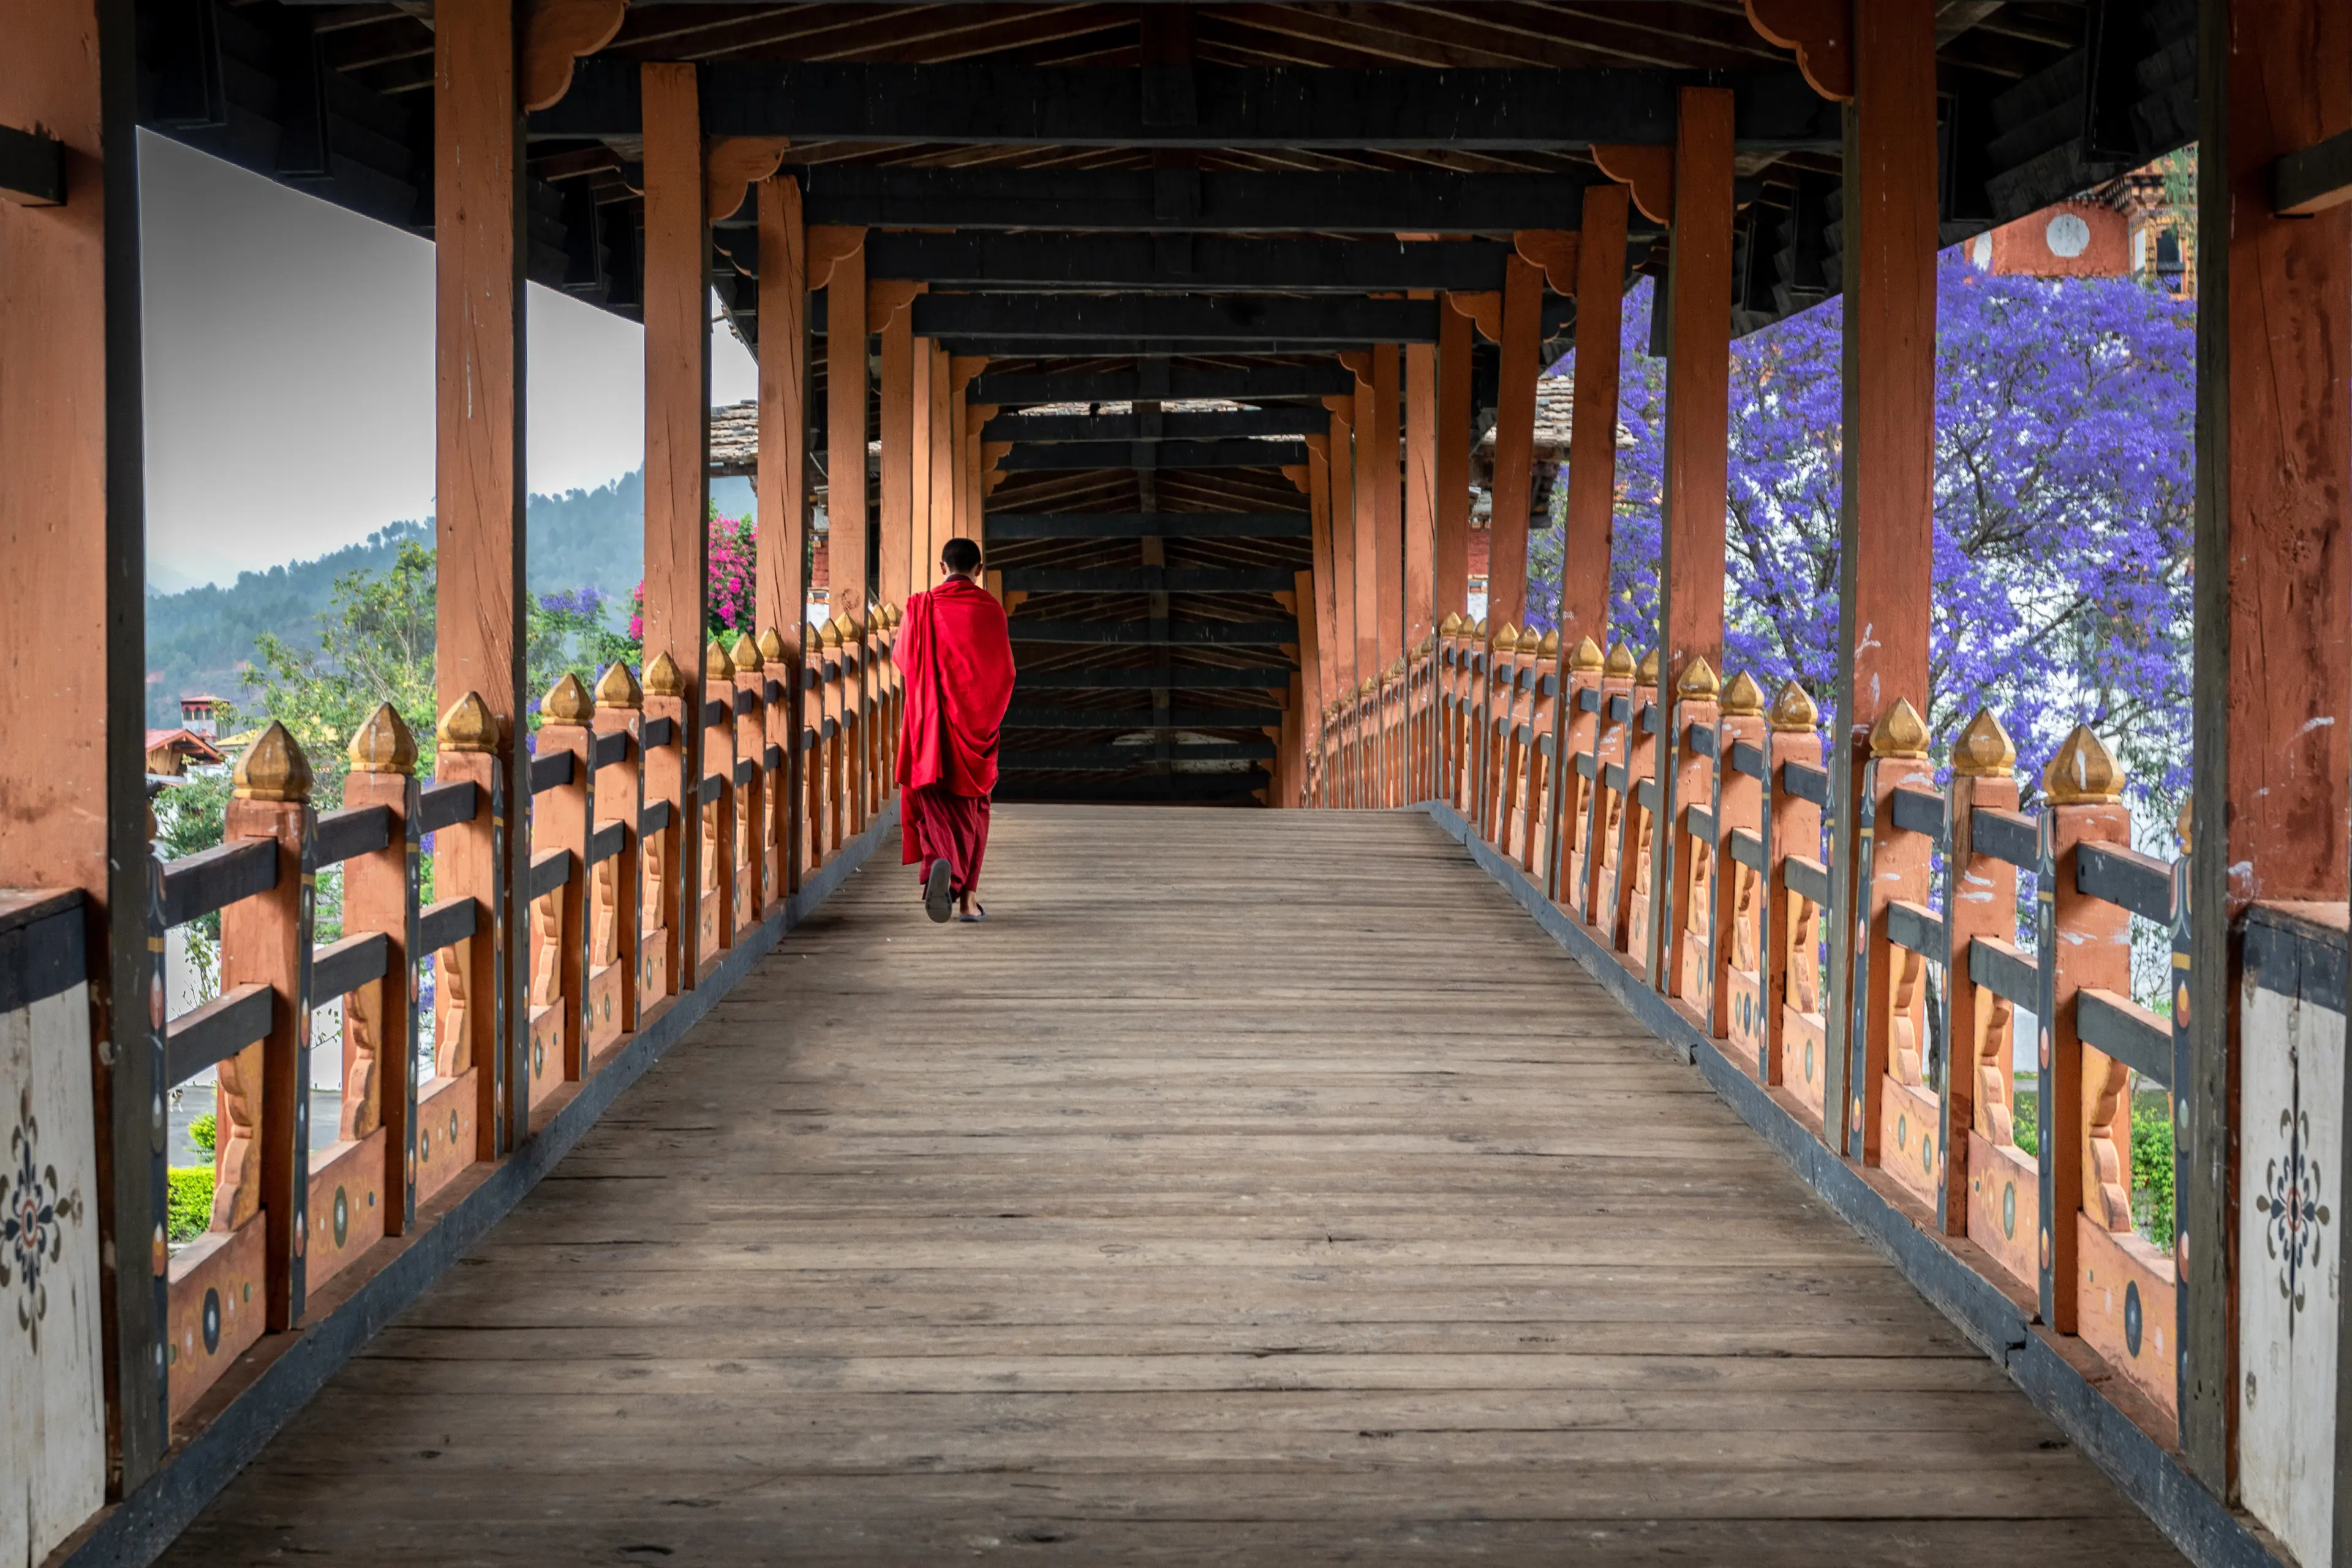 6-Day Relaxing and Nightlife Travel Itinerary for Couples in Bhutan